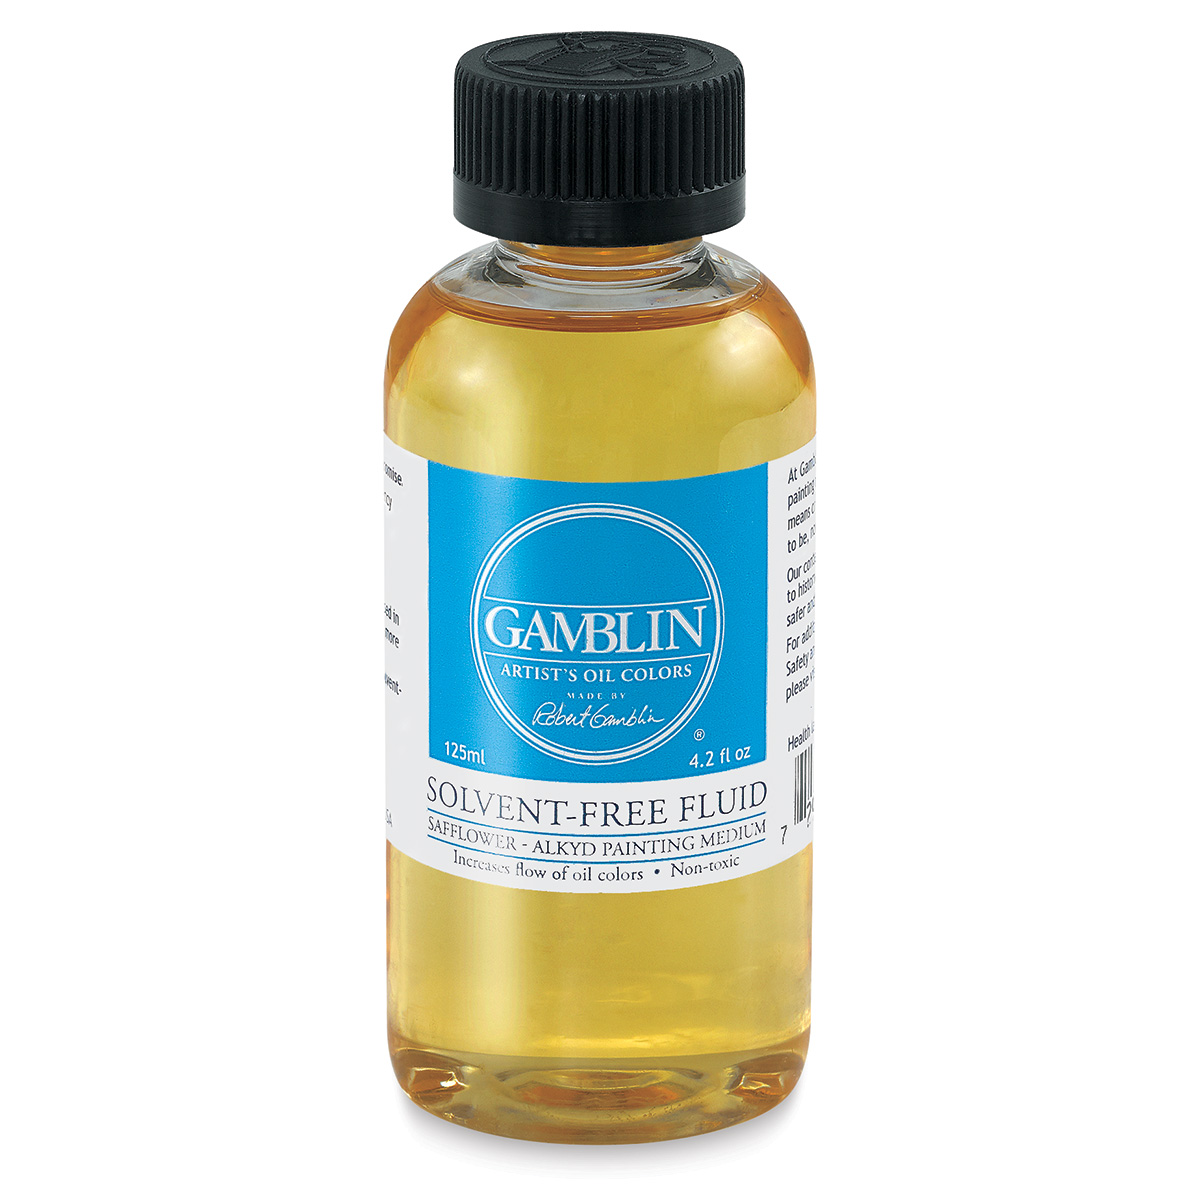 Gamblin Artist Oils are completely non-toxic combine tradition with  technology